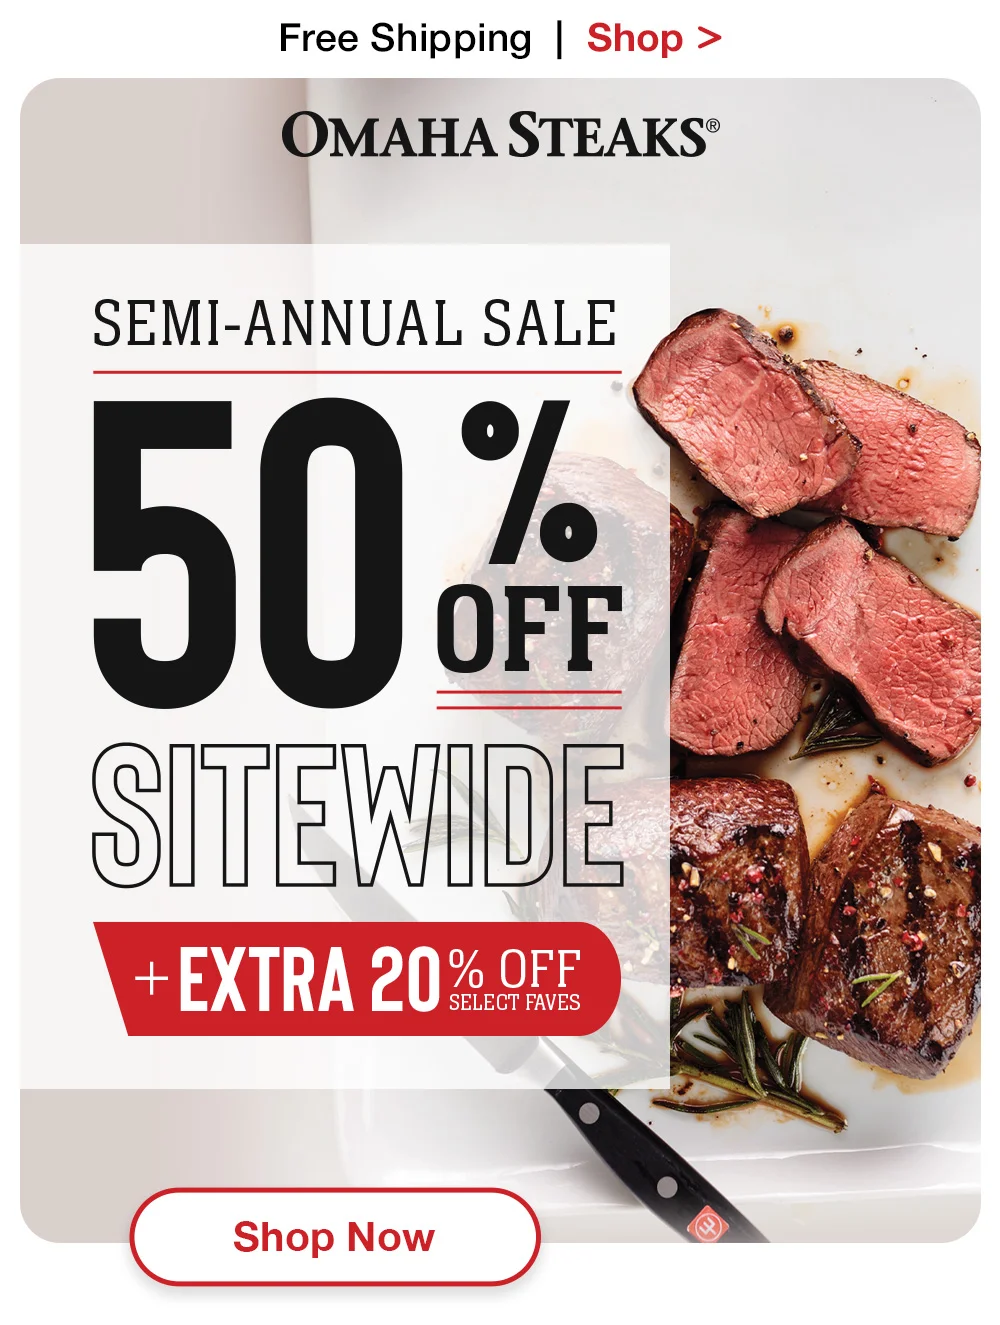 Free Shipping | Shop > OMAHA STEAKS® | SEMI-ANNUAL SALE - 50% SITEWIDE + EXTRA 20% OFF SELECT FAVES || Shop Now